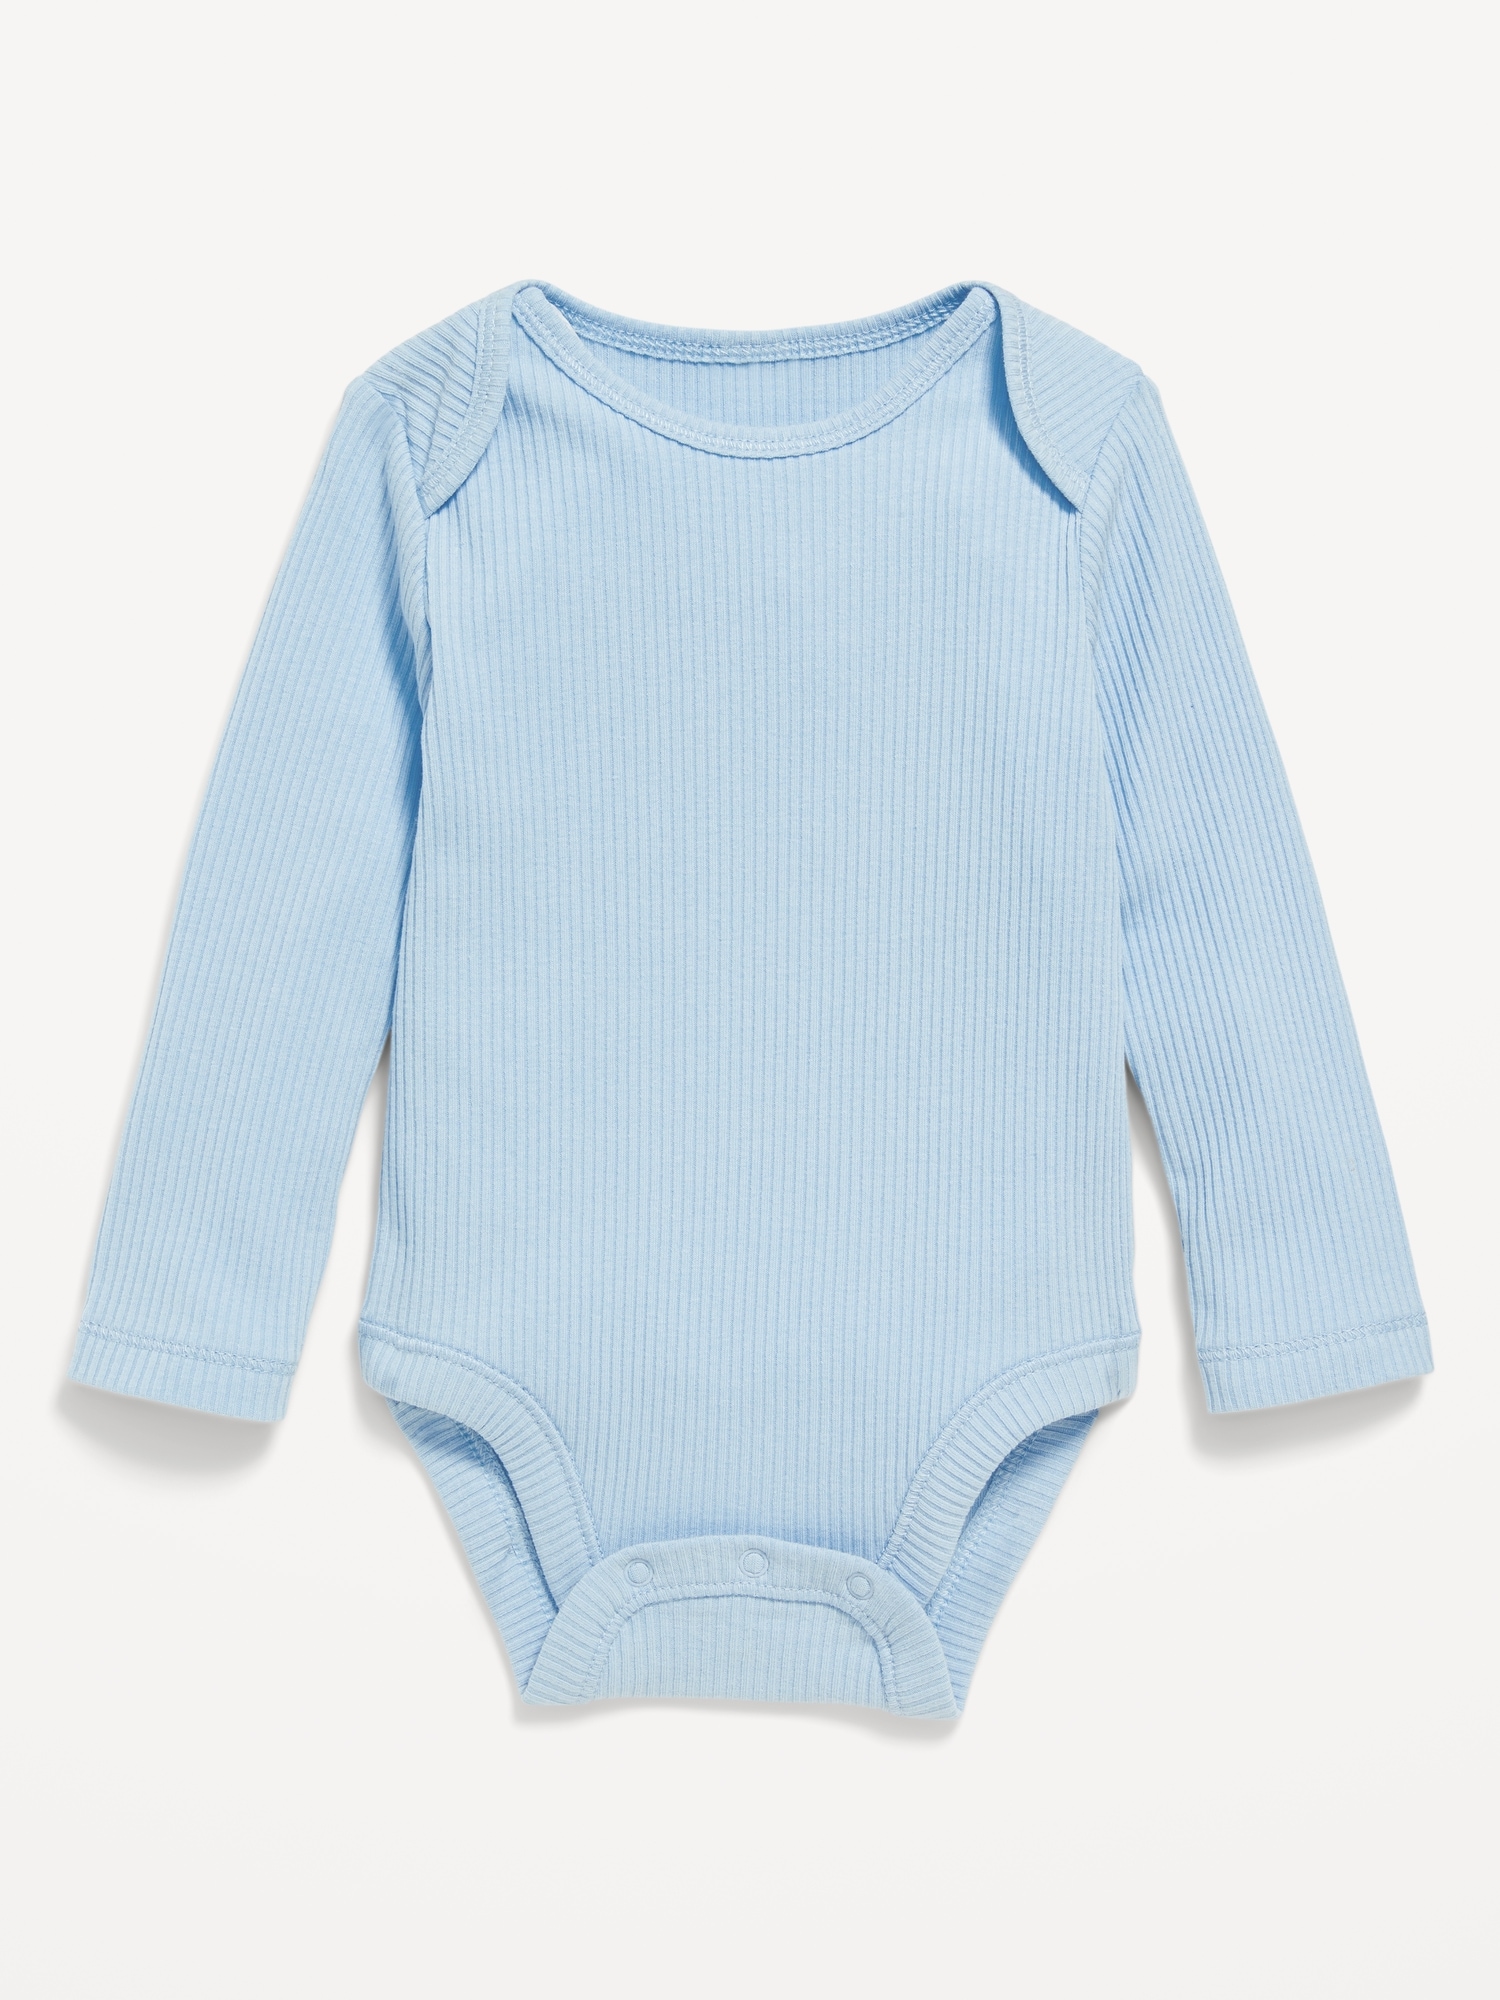 Long-Sleeve Ribbed Bodysuit for Baby